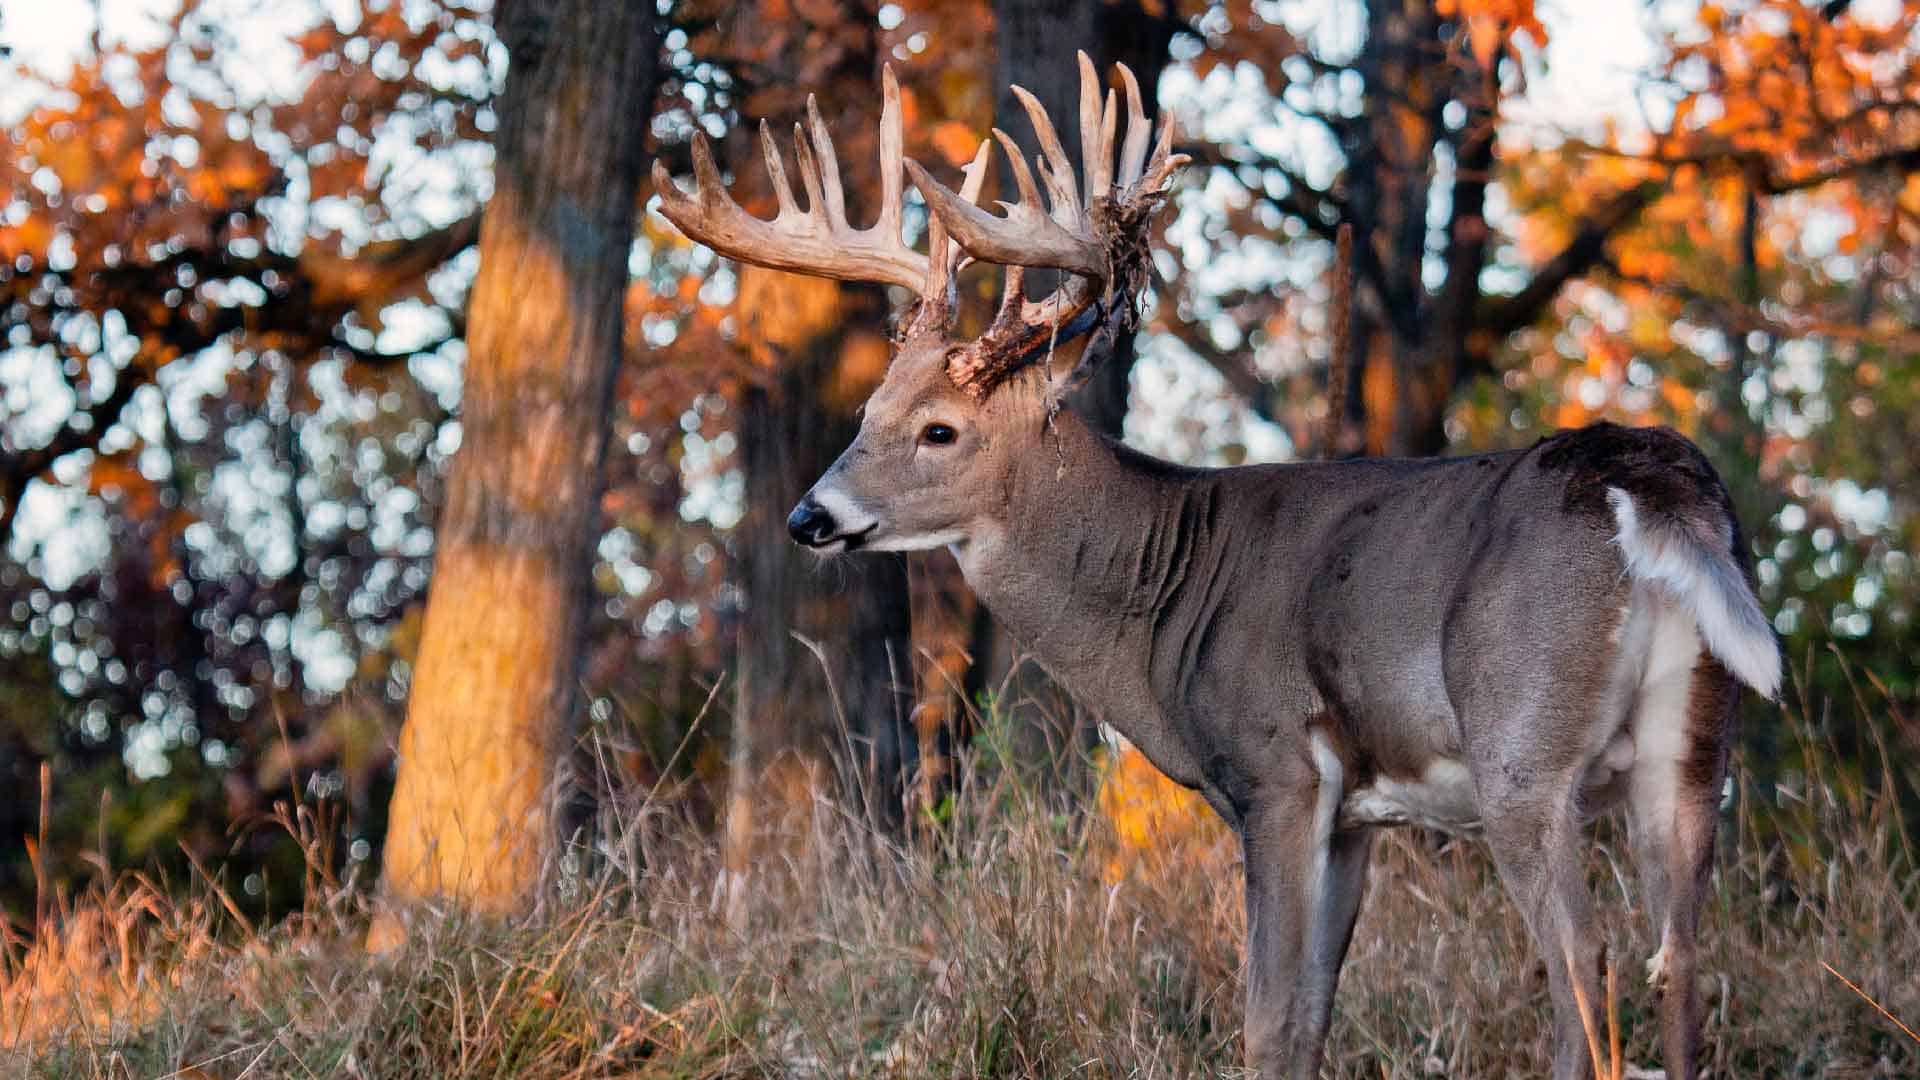 The best way to protect trees from deer is prevention.